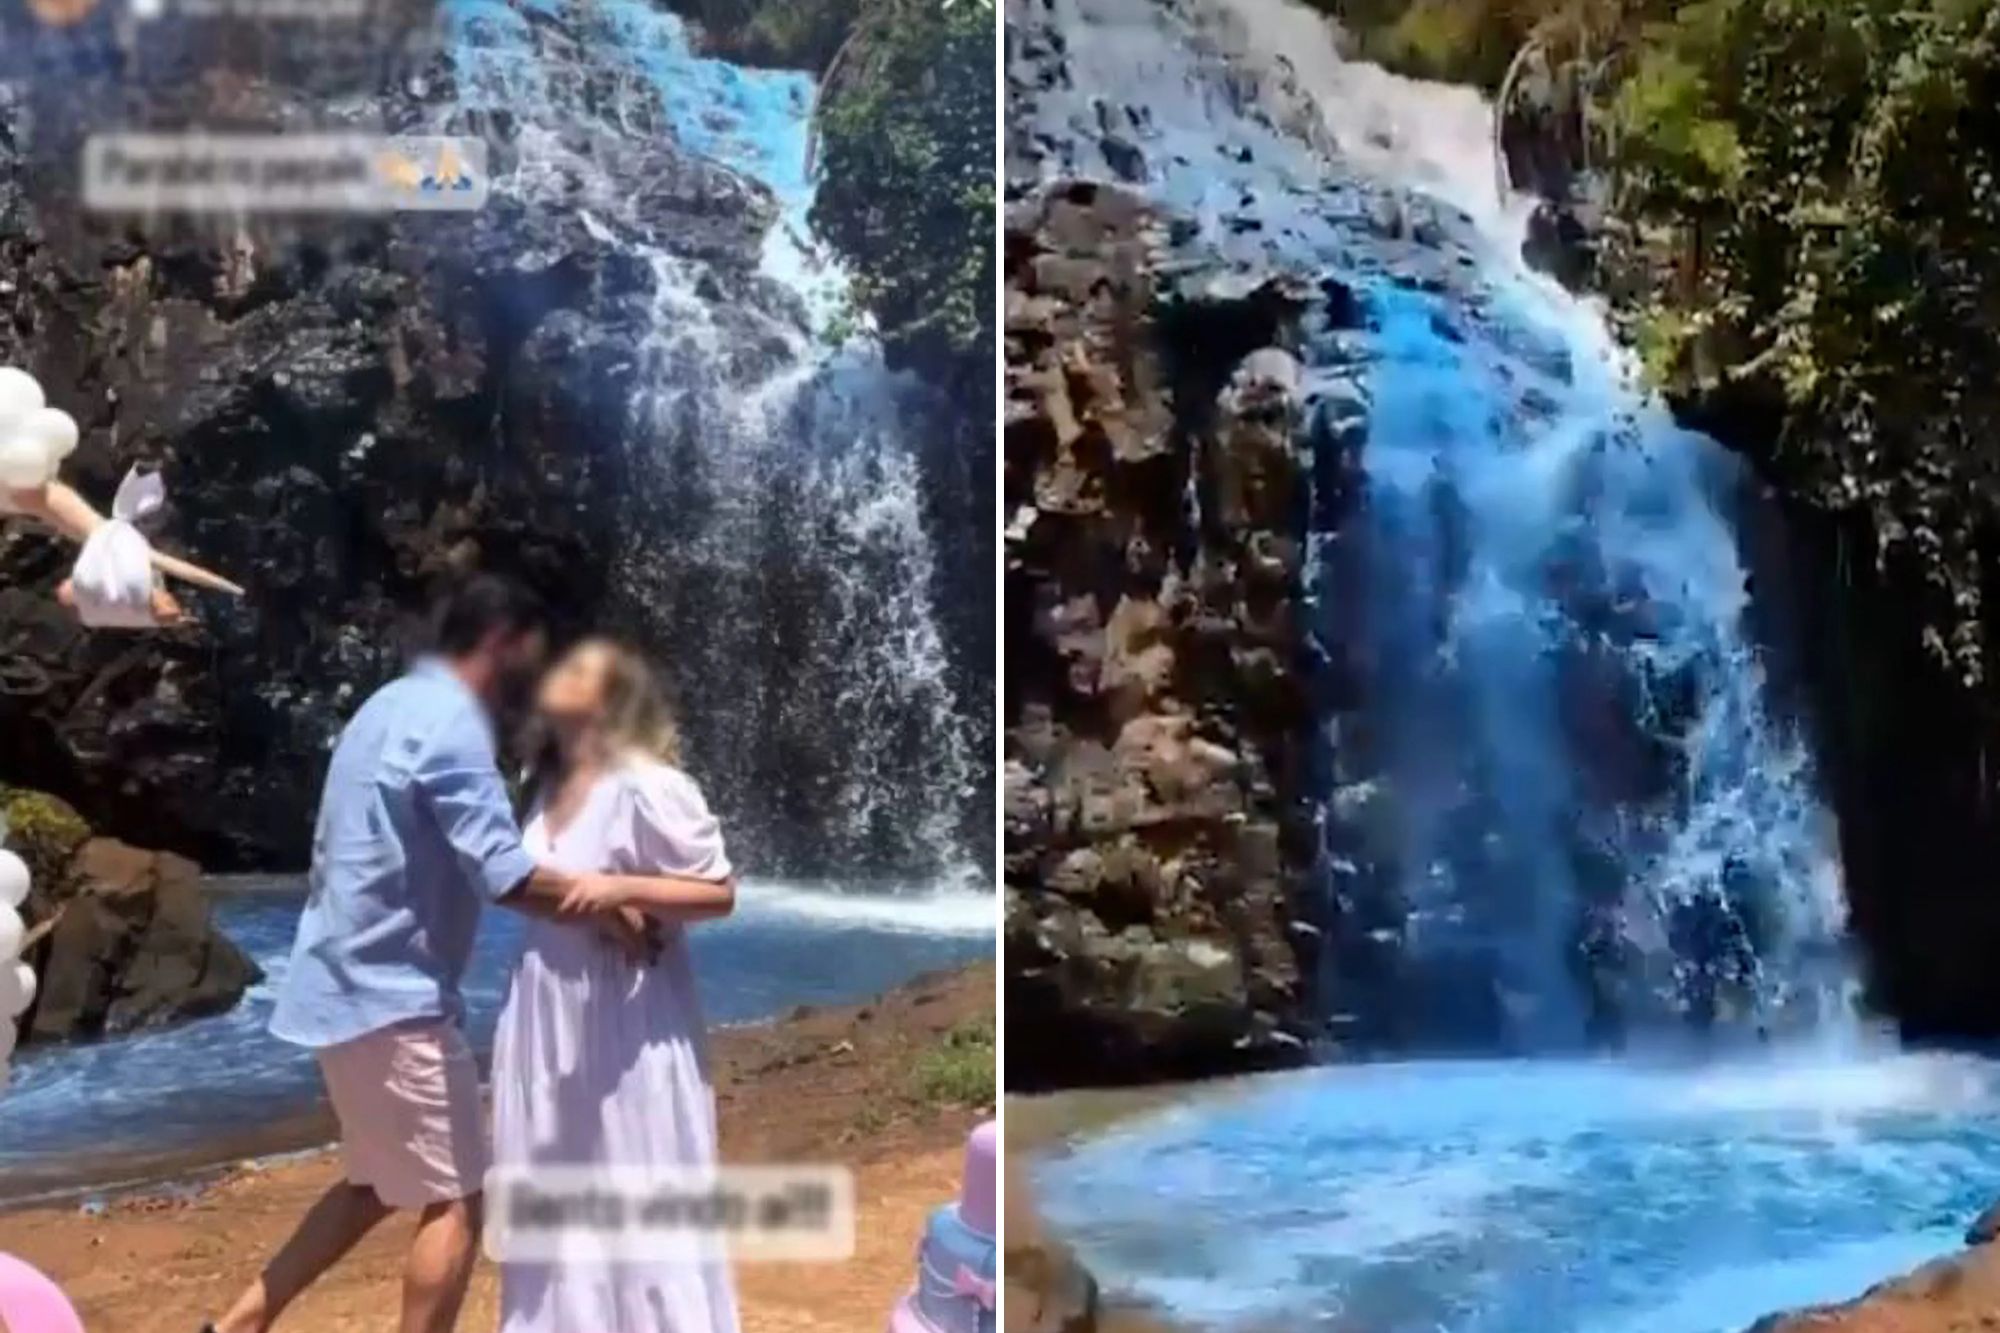 Couple turn waterfall BLUE in gender reveal party - but stunt backfires badly